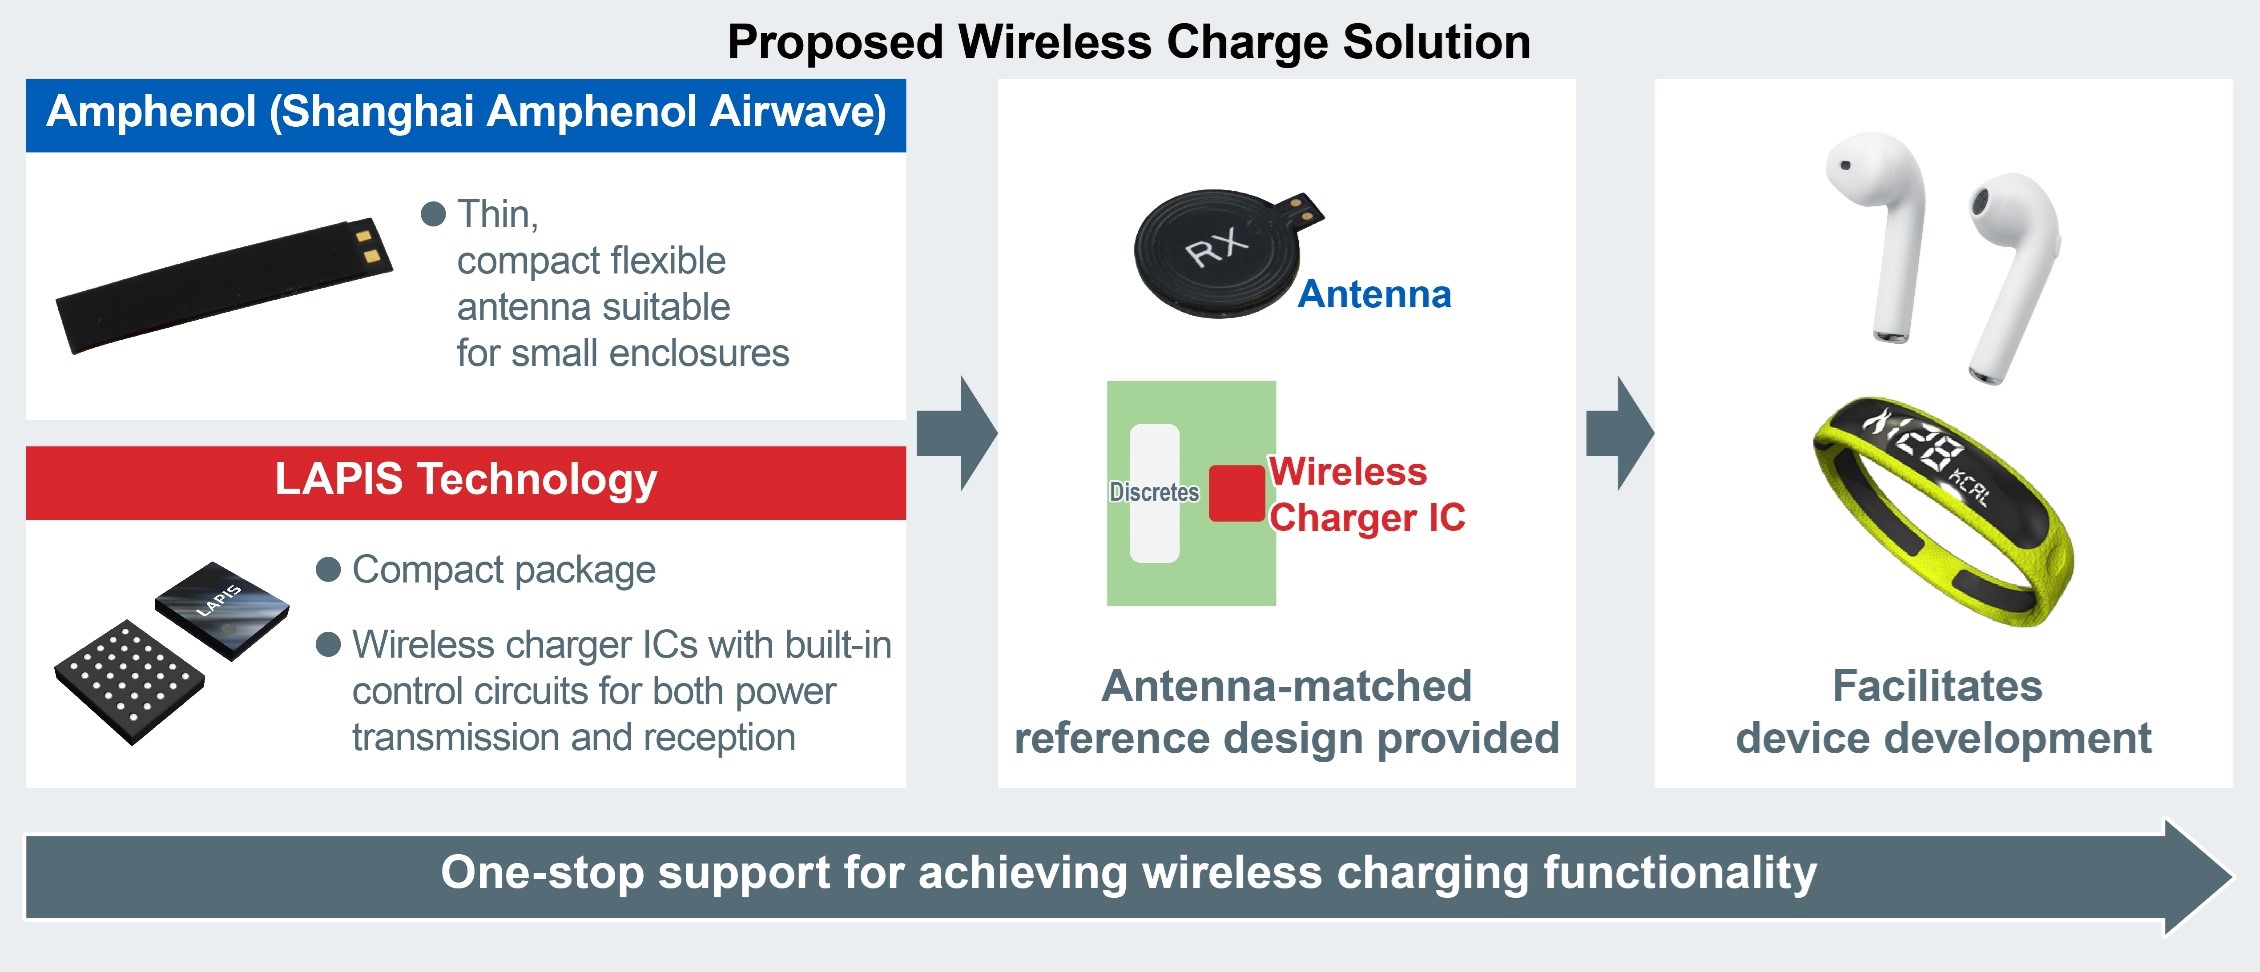 Proposed Wireless Charging Solution